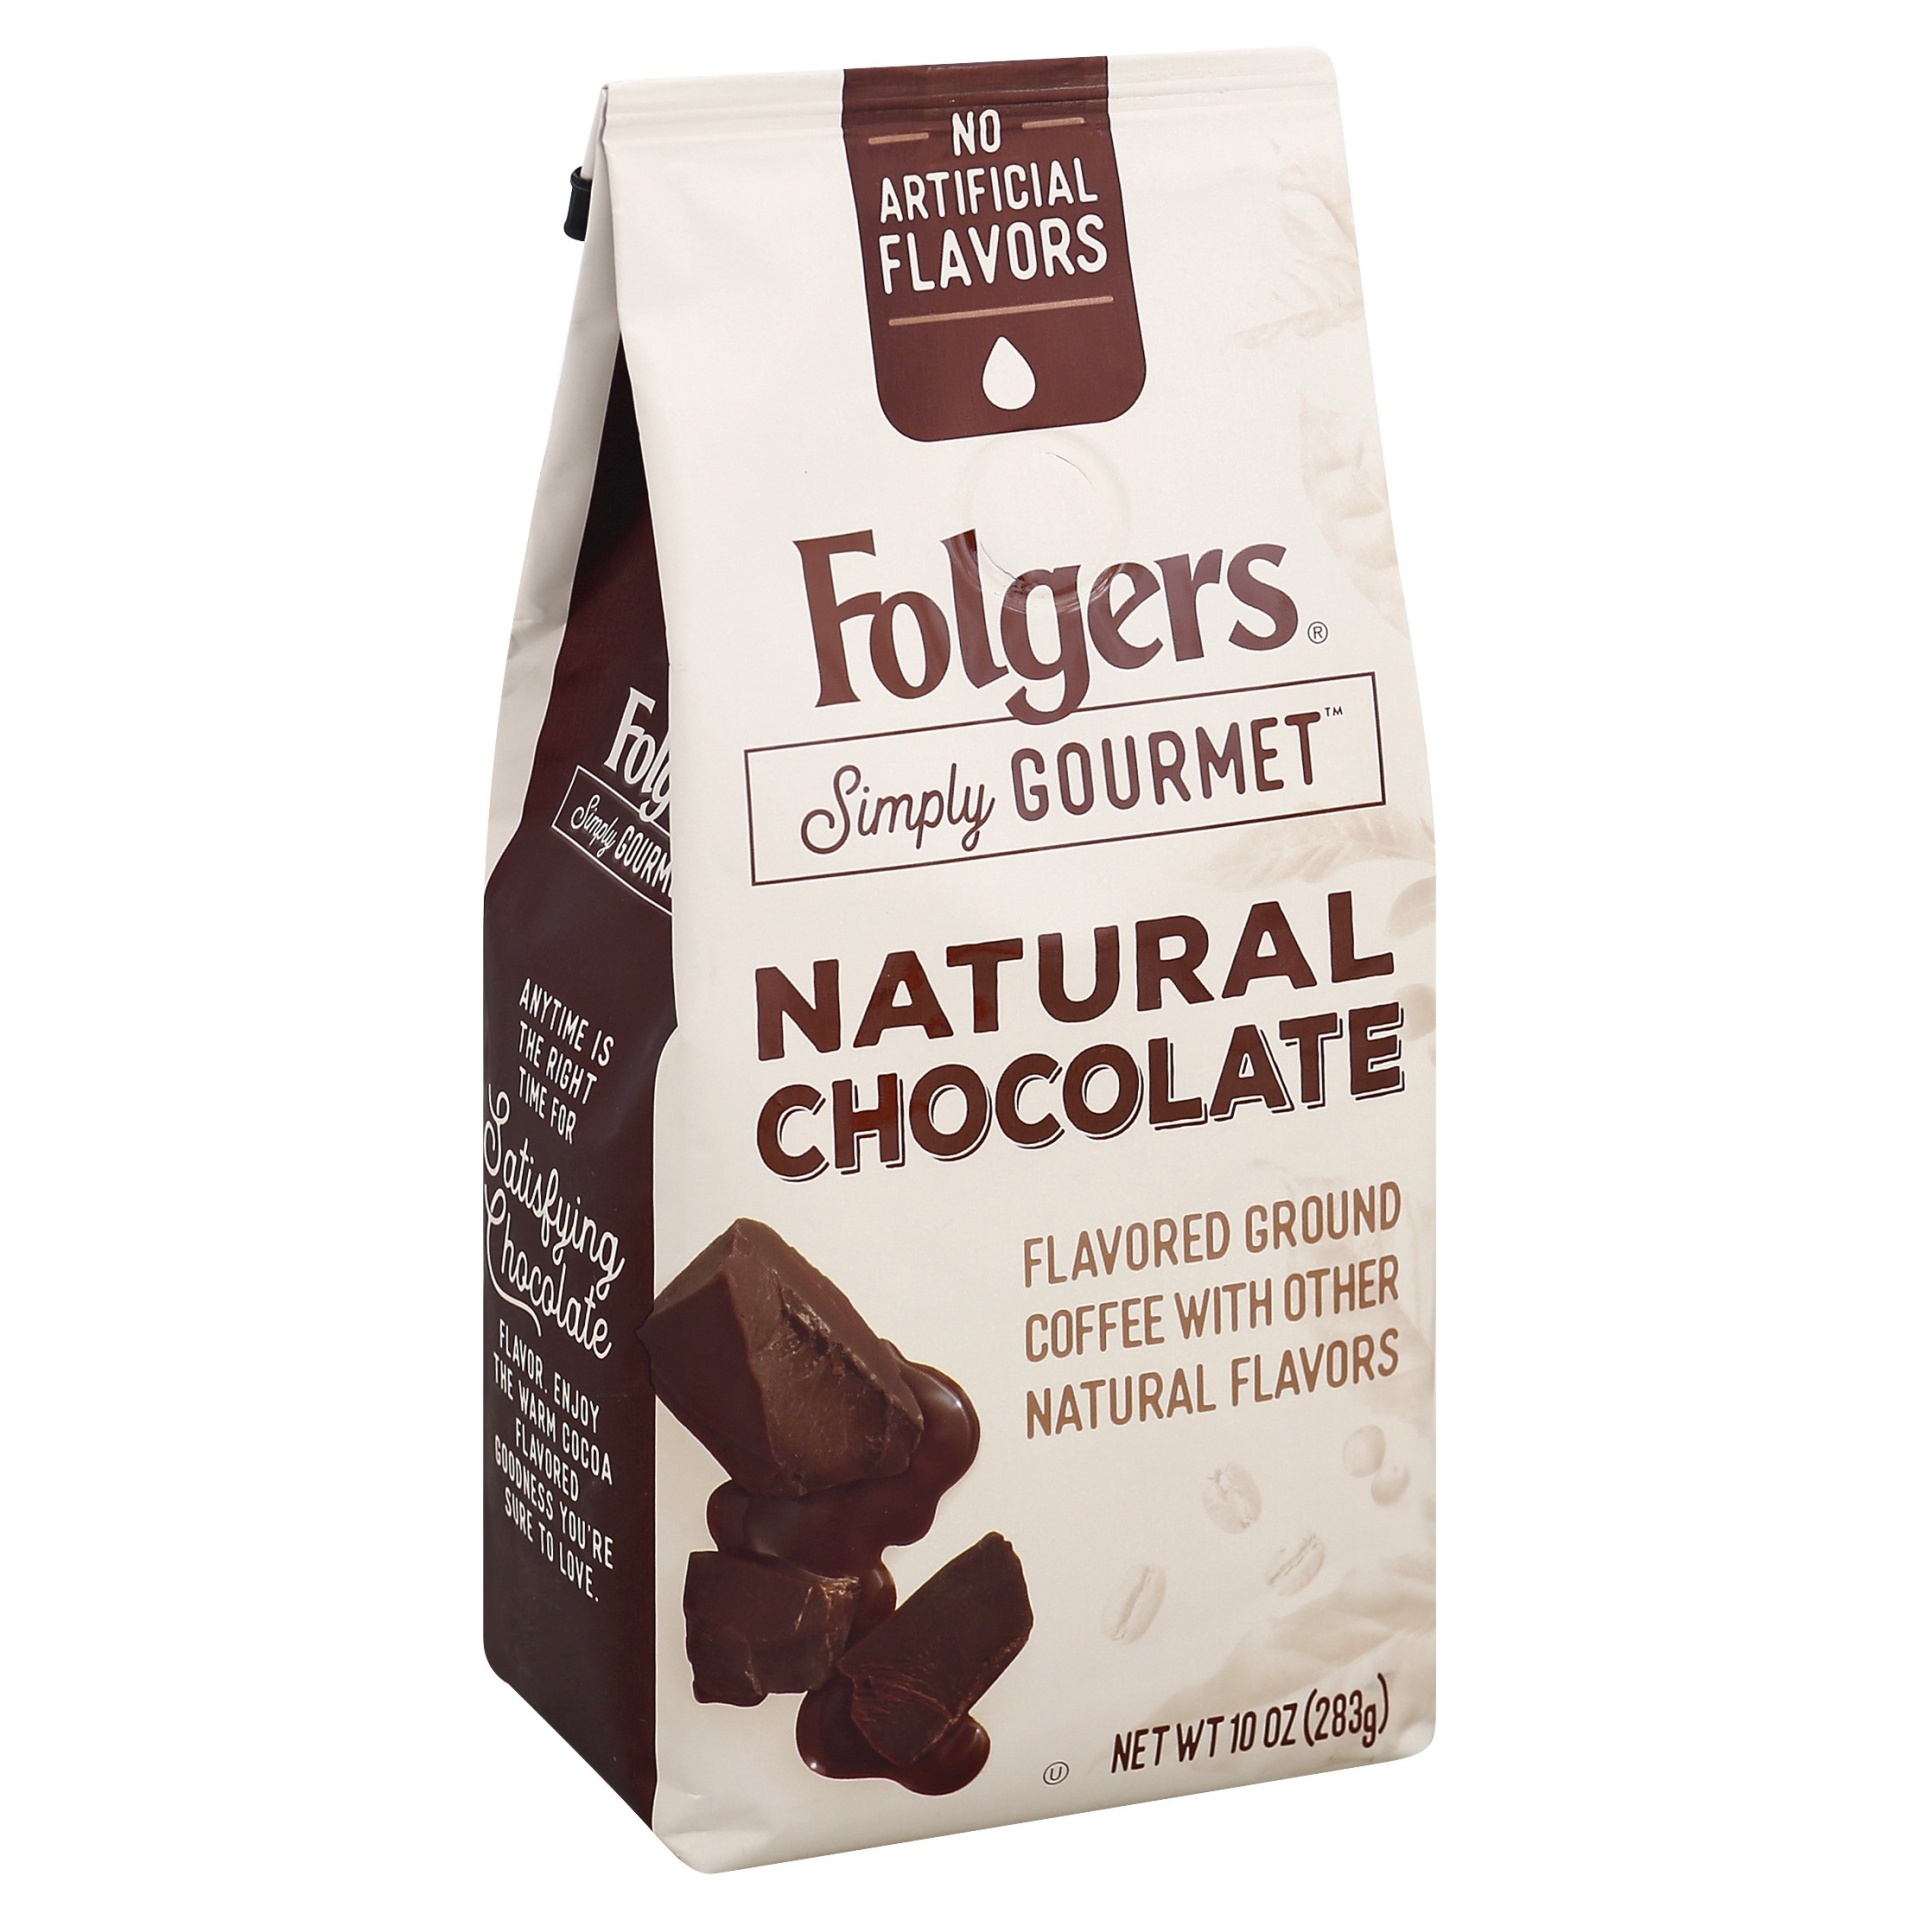 slide 1 of 1, Folgers Simply Gourmet Natural Chocolate Flavored Ground Coffee, With Other Natural Flavors, 10 oz